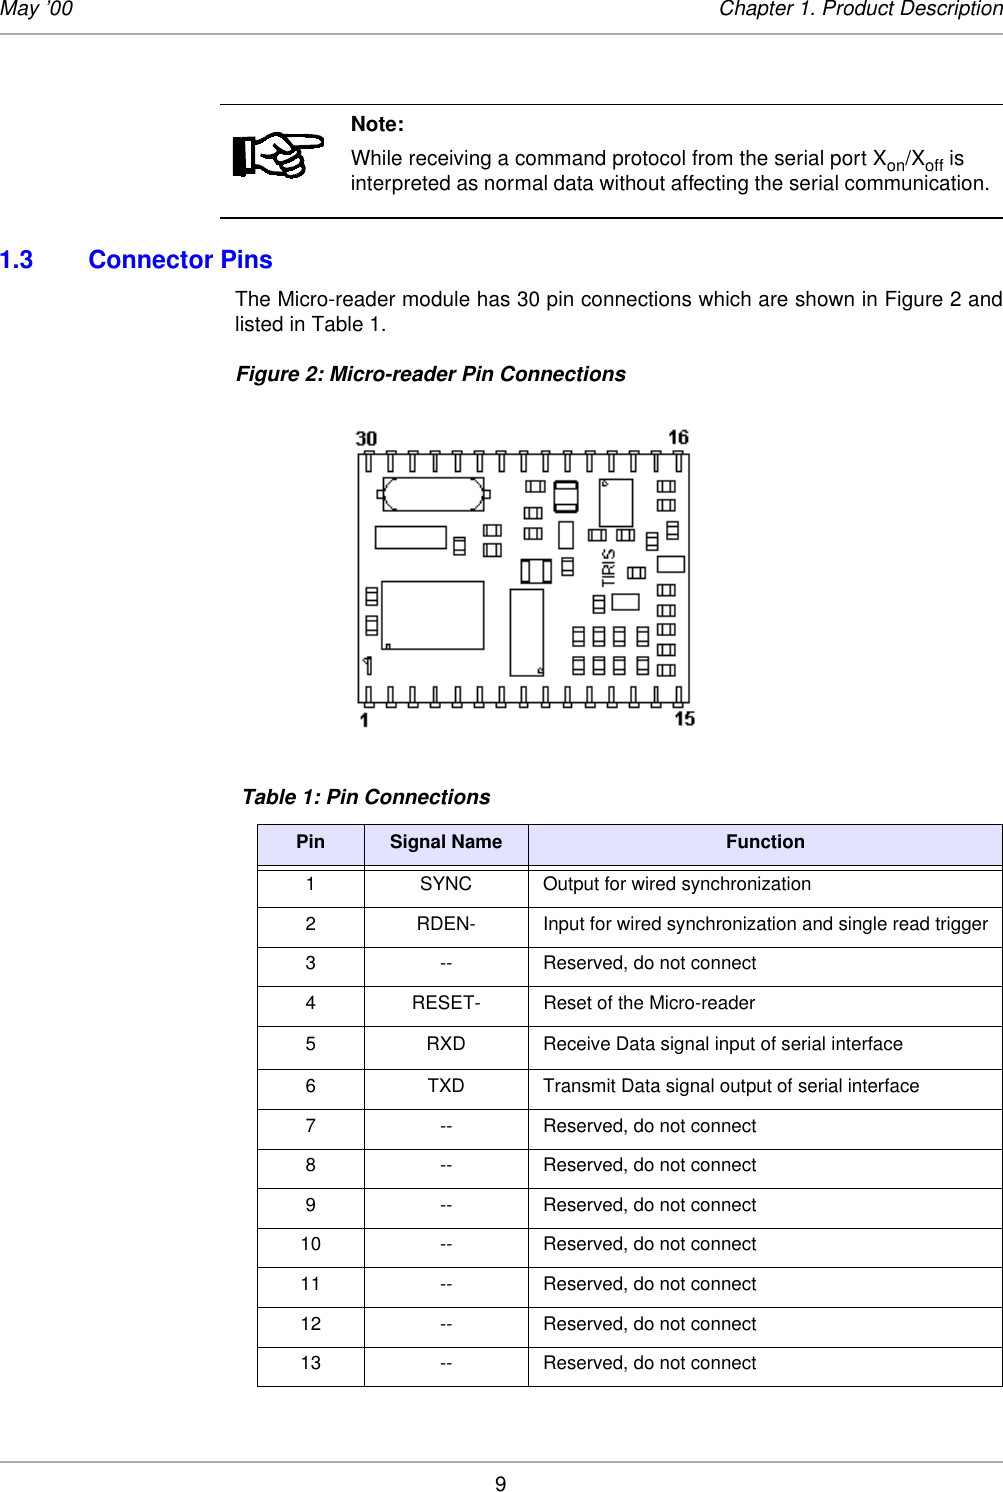 9May ’00 Chapter 1. Product Description1.3 Connector PinsThe Micro-reader module has 30 pin connections which are shown in Figure 2 andlisted in Table 1. Figure 2: Micro-reader Pin ConnectionsNote:While receiving a command protocol from the serial port Xon/Xoff is interpreted as normal data without affecting the serial communication. Table 1: Pin ConnectionsPin Signal Name Function 1 SYNC Output for wired synchronization2 RDEN- Input for wired synchronization and single read trigger3 -- Reserved, do not connect4 RESET- Reset of the Micro-reader5 RXD Receive Data signal input of serial interface6 TXD Transmit Data signal output of serial interface7 -- Reserved, do not connect8 -- Reserved, do not connect9 -- Reserved, do not connect10 -- Reserved, do not connect11 -- Reserved, do not connect12 -- Reserved, do not connect13 -- Reserved, do not connect